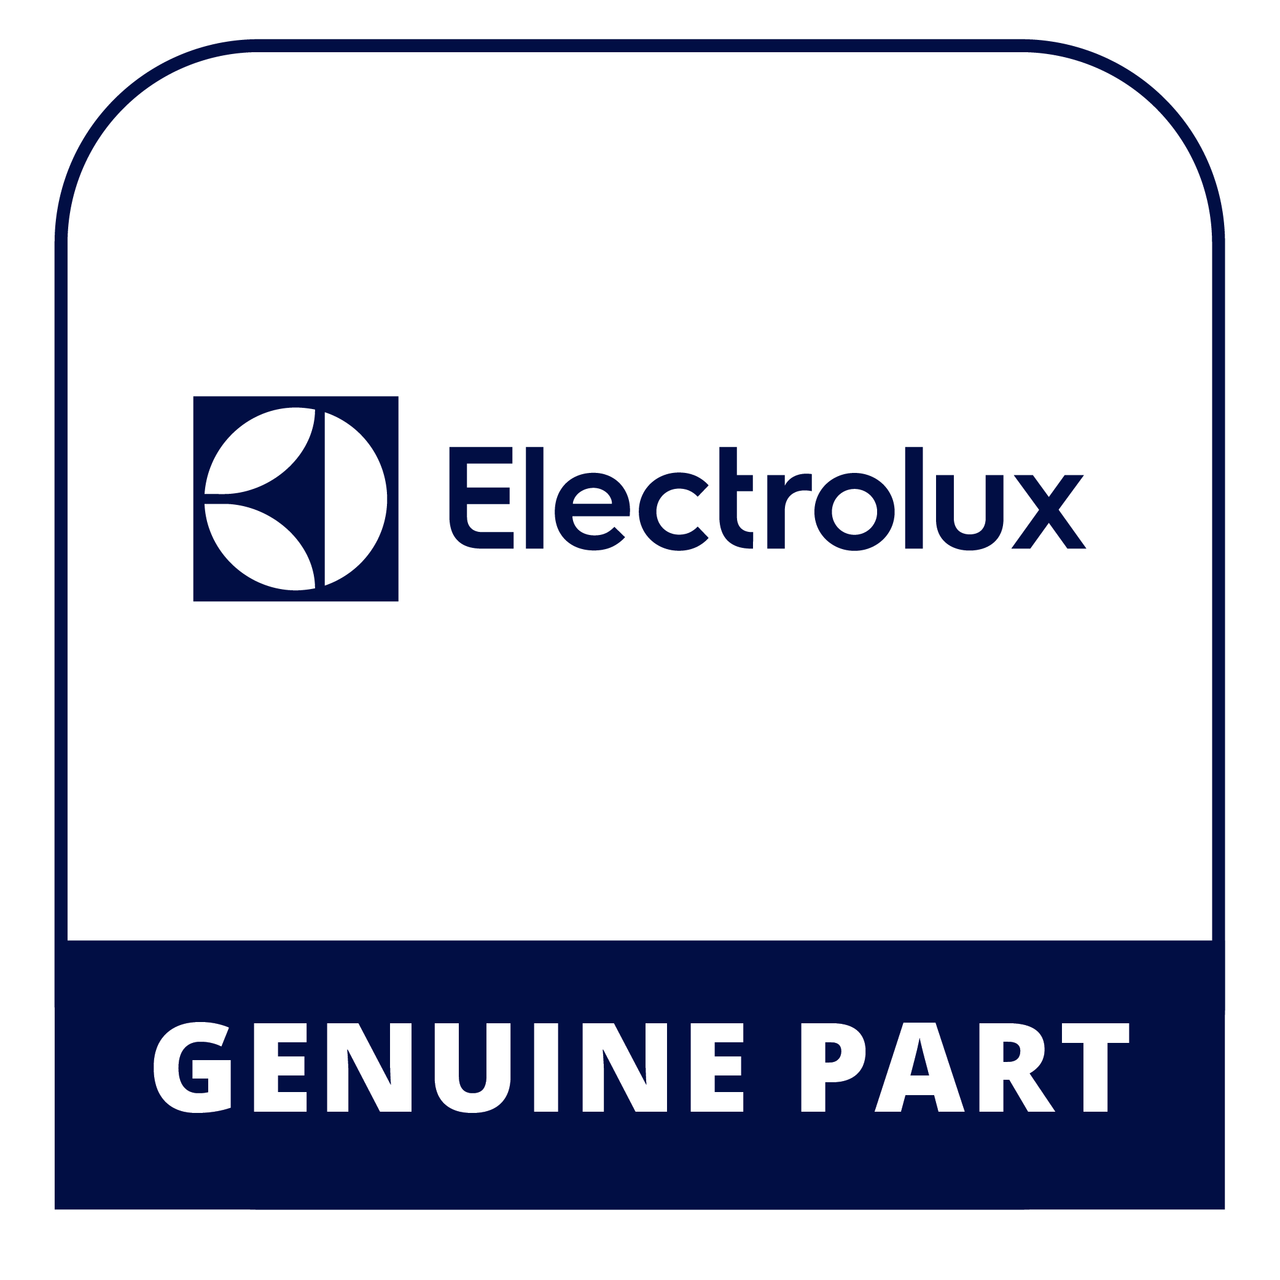 Frigidaire - Electrolux 316901007 Owners Manual - Genuine Electrolux Part